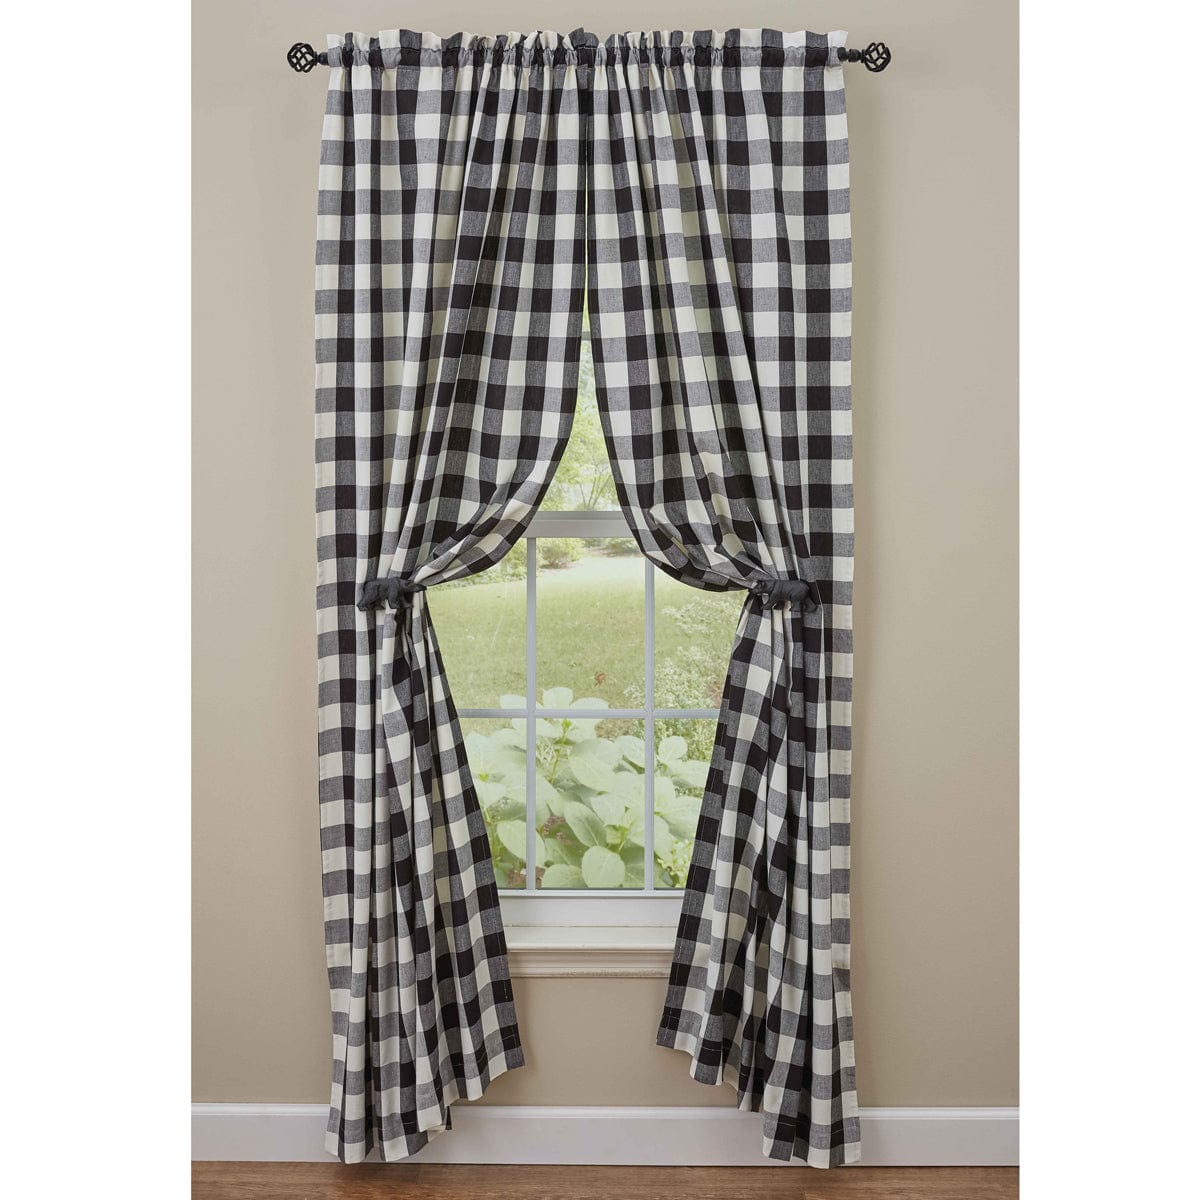 Wicklow Check in Black & Cream Panel Pair With Tie Backs 84" Long Lined-Park Designs-The Village Merchant